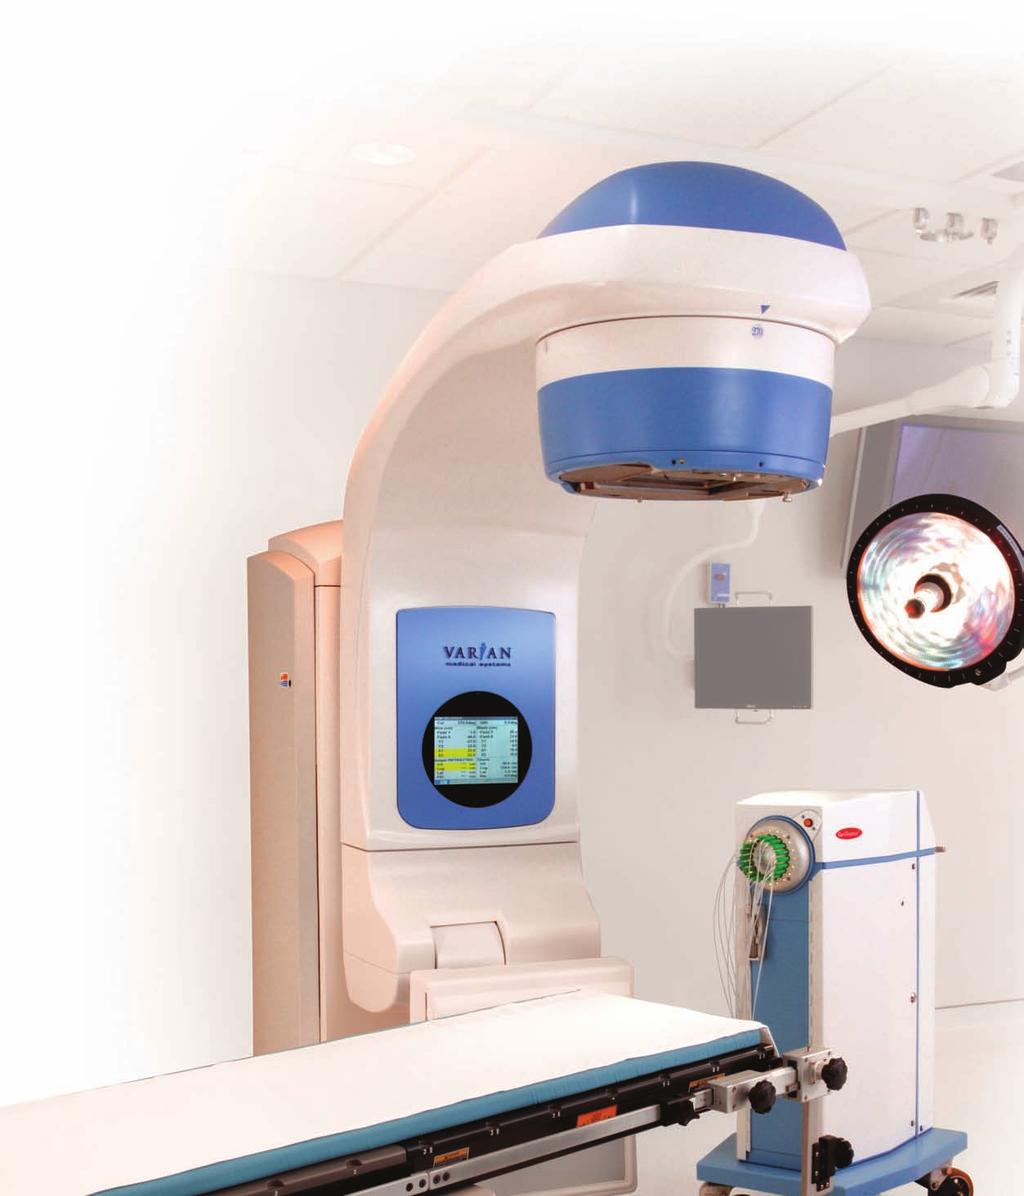 The Acuity BrachyTherapy Suite Integrating Imaging, Planning, and Treatment in a Single Room Each component draws on the power and precision of the leading-edge Acuity TM imaging system from Varian